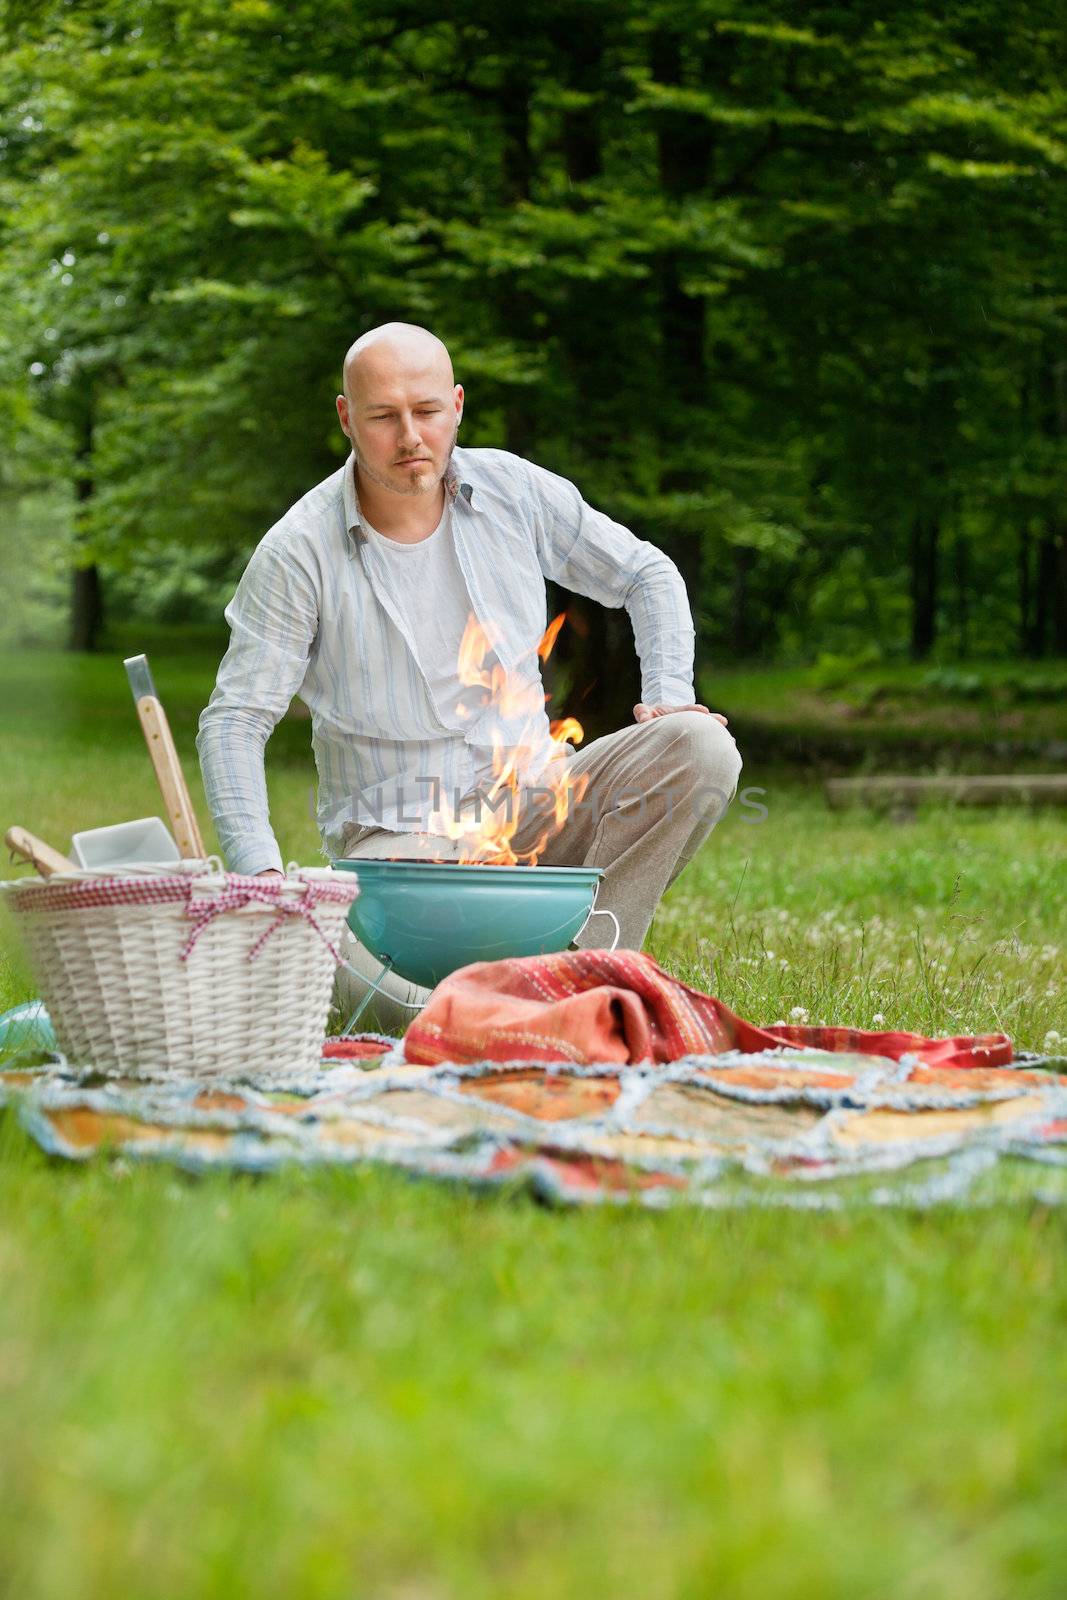 Man At An Outdoor Picnic by leaf